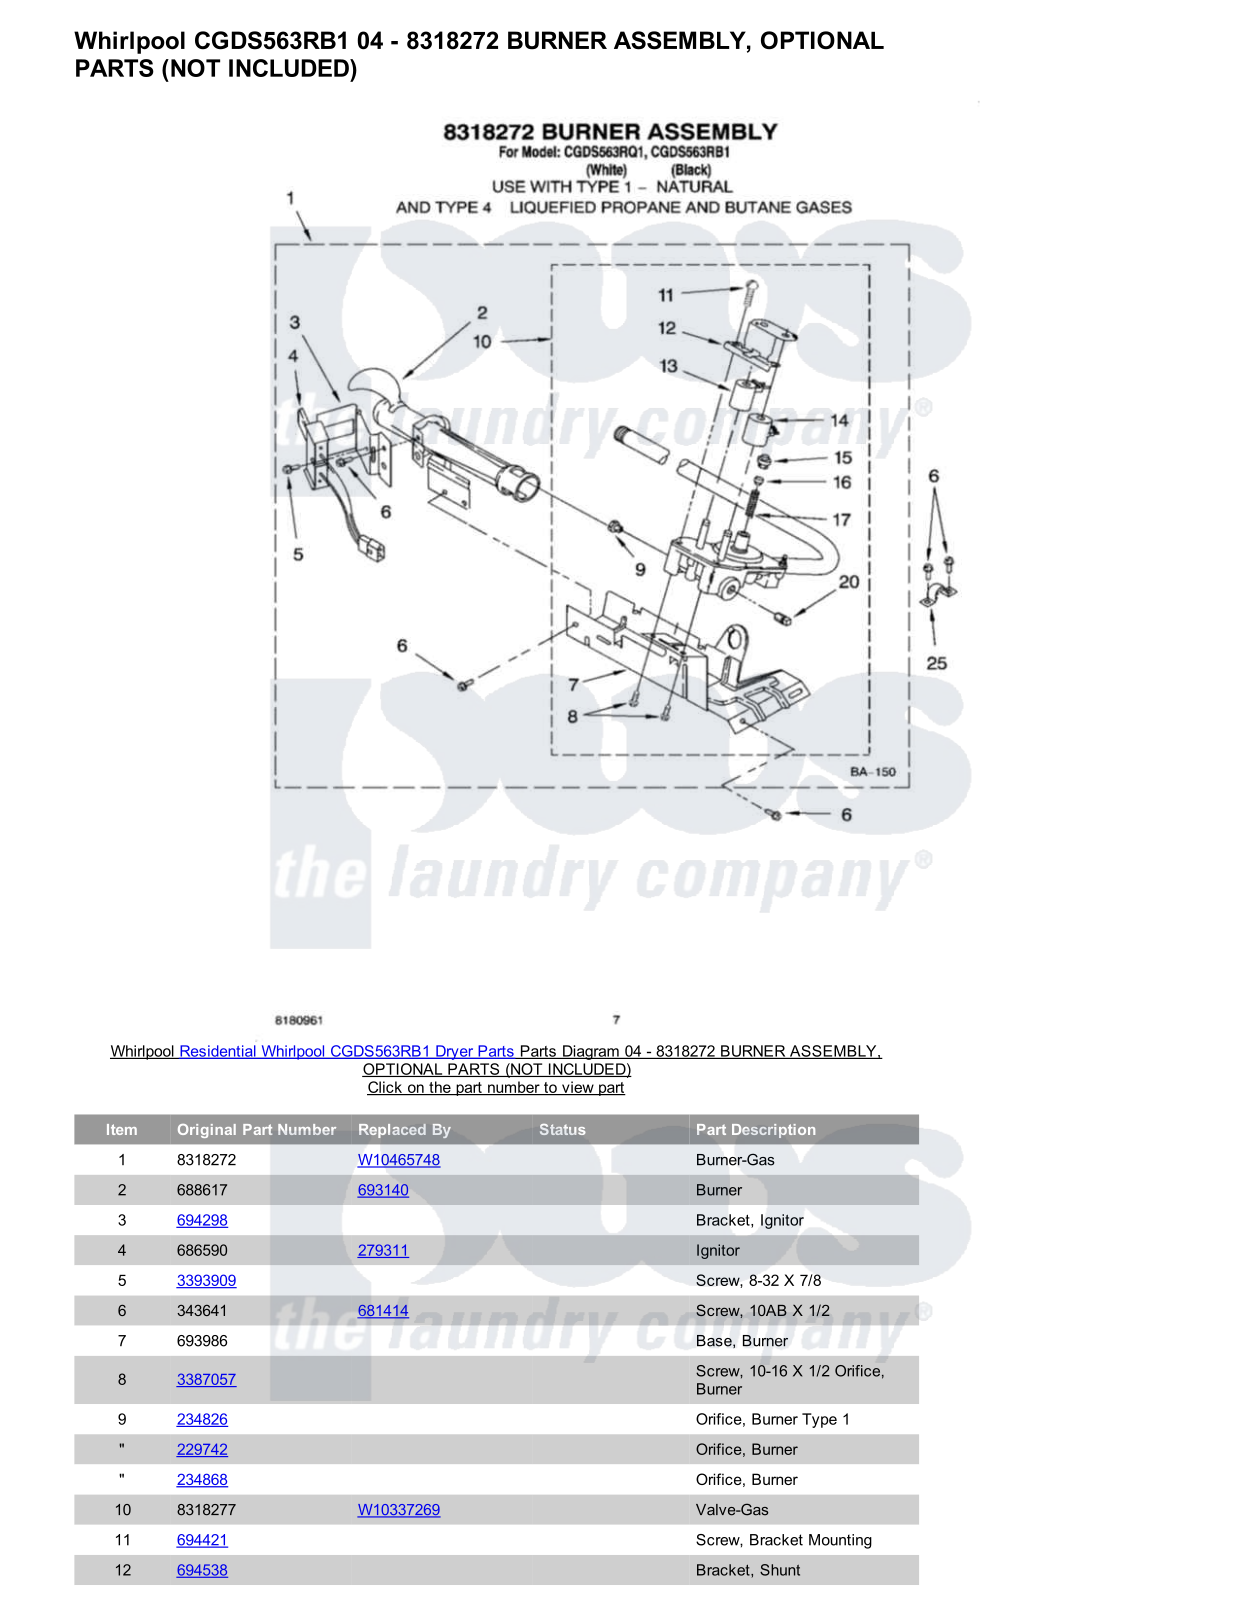 Whirlpool CGDS563RB1 Parts Diagram